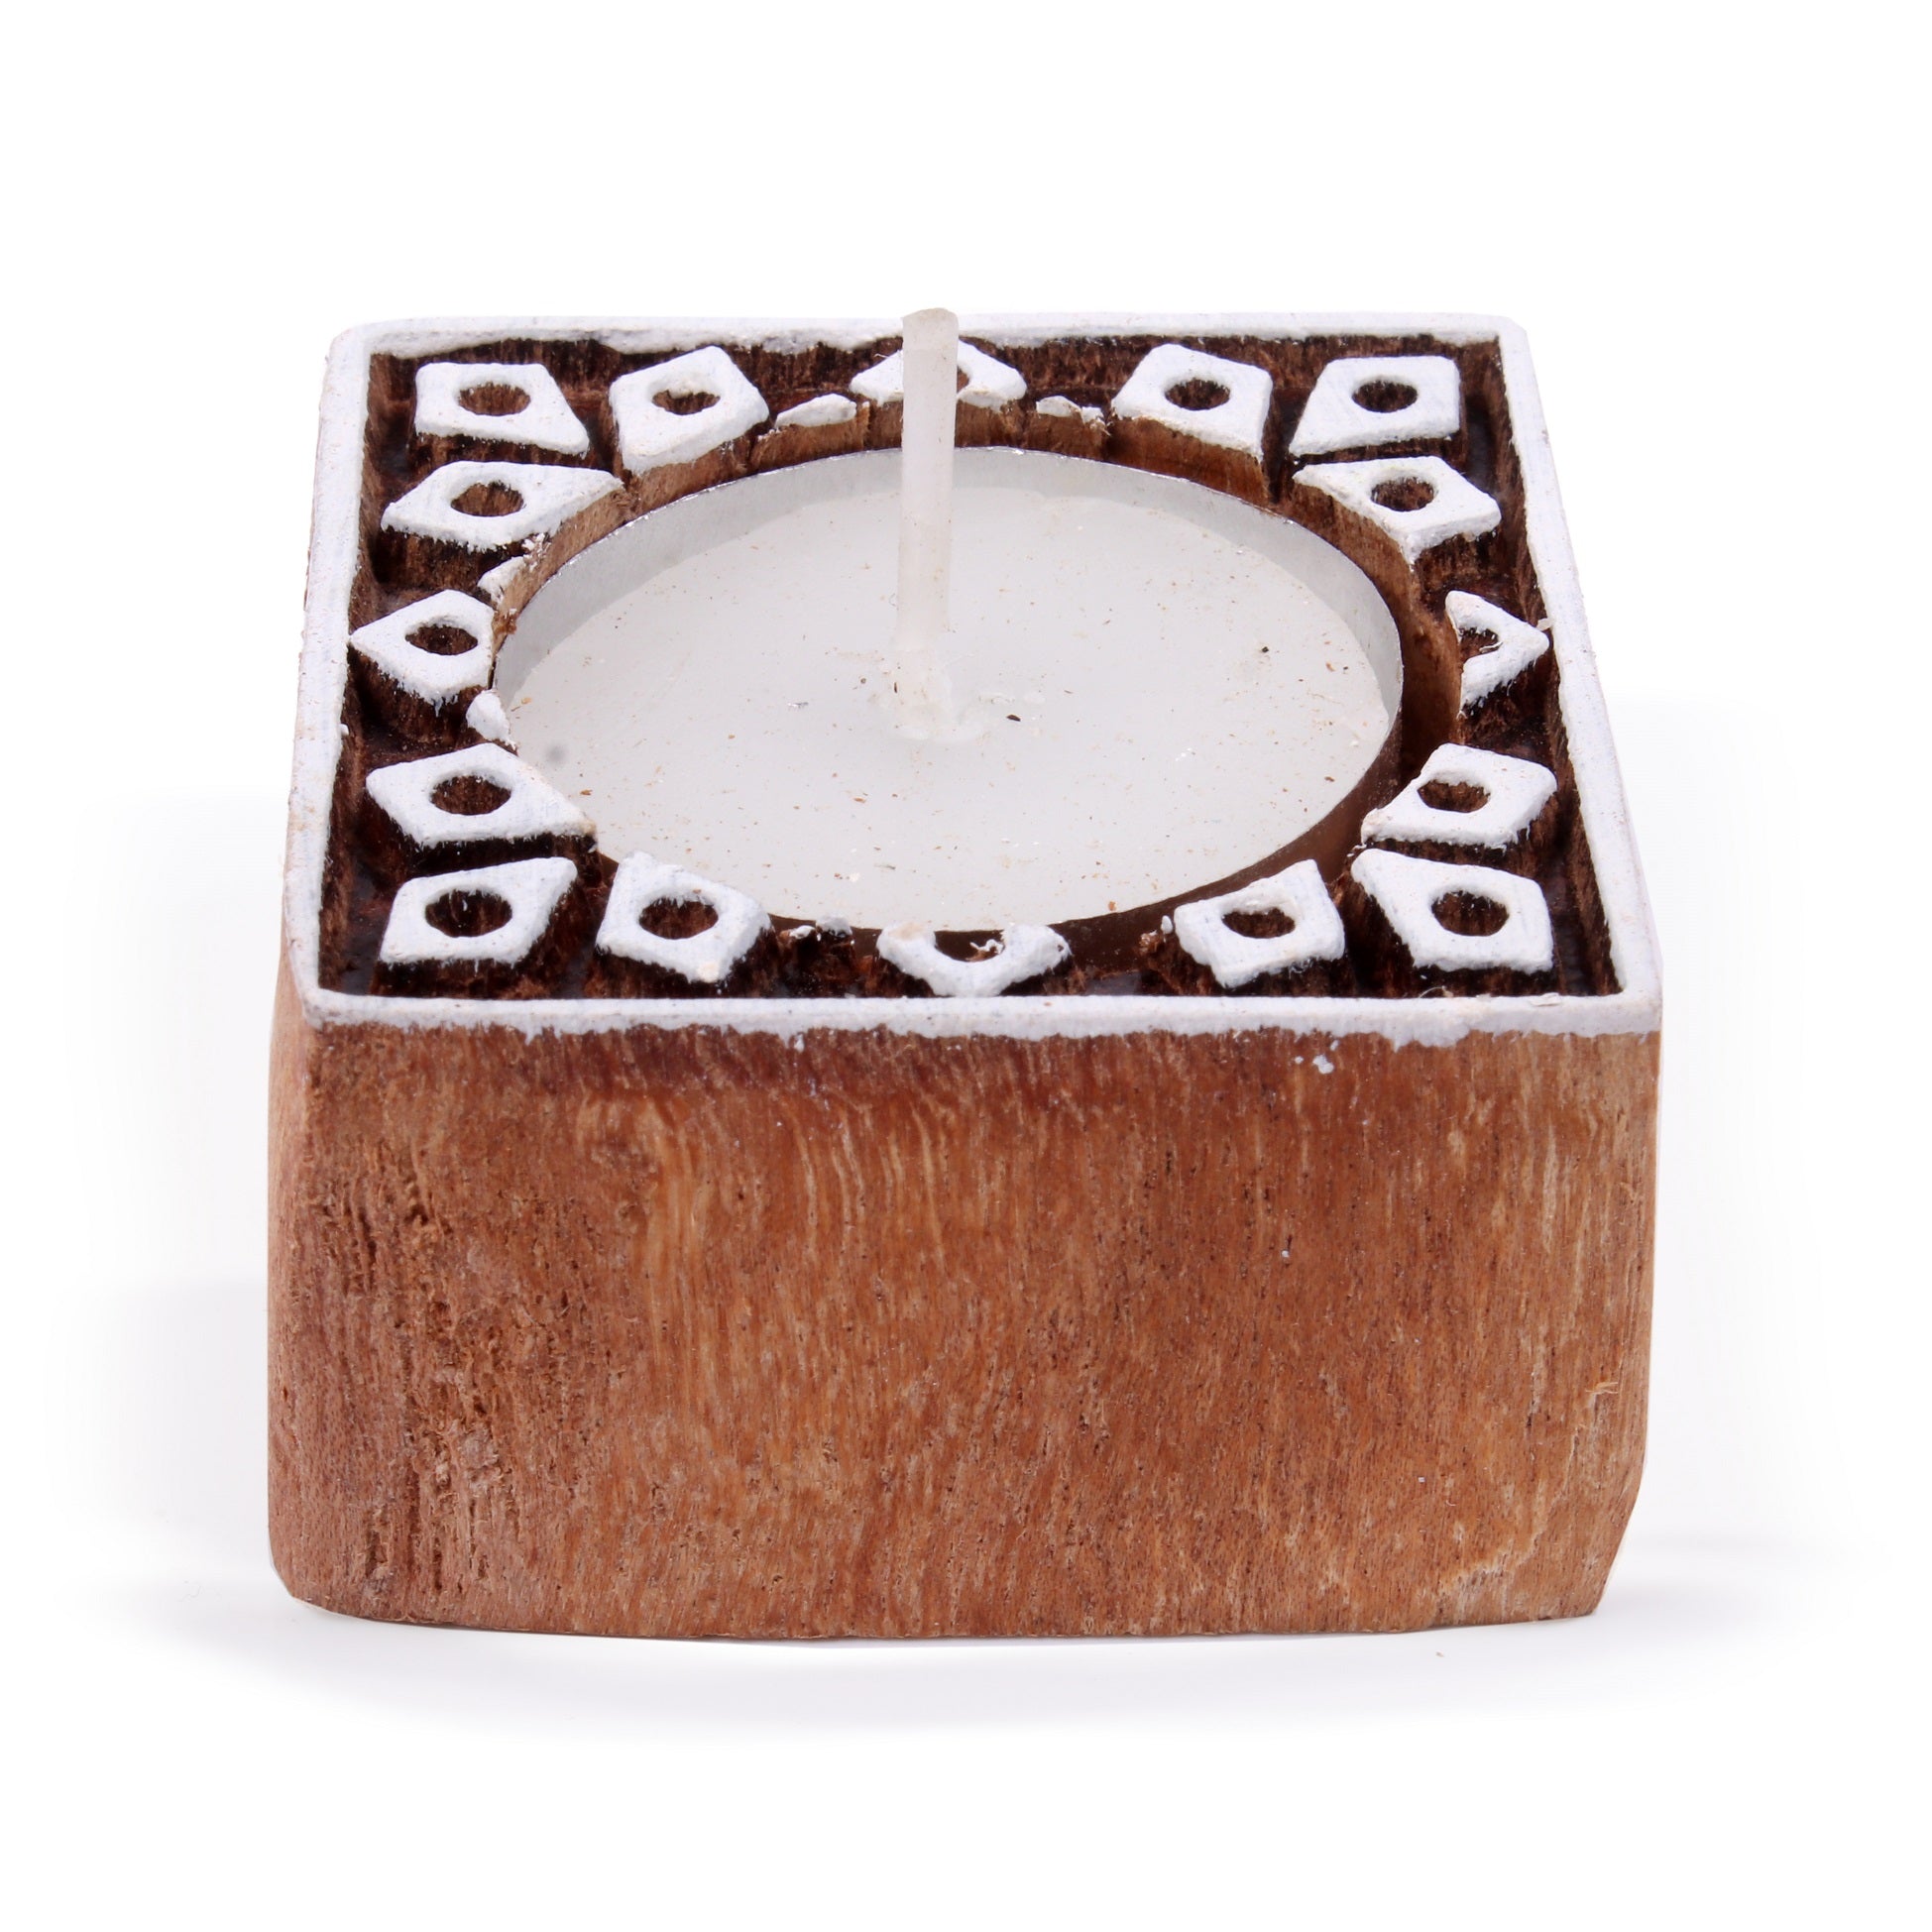 Wooden Printing Block & Candle Holder 2 In 1 Diamond Rush 1Pc